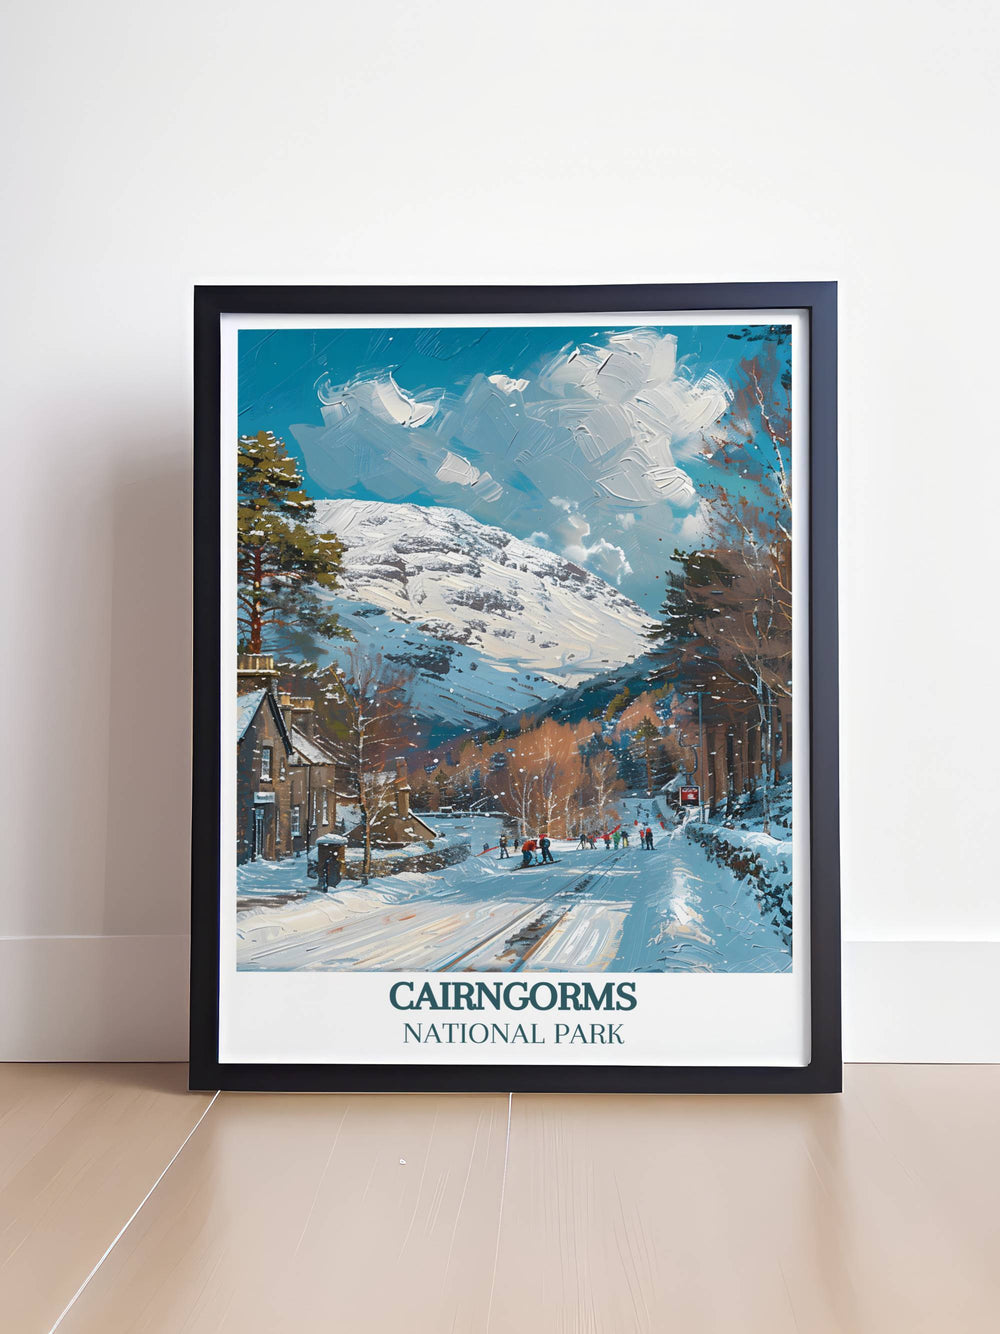 Cairngorms Print capturing the serene beauty of Scotland with Cairngorm Mountain. This national park poster is ideal for wall art and gifts, showcasing the majestic landscapes of the Highlands.